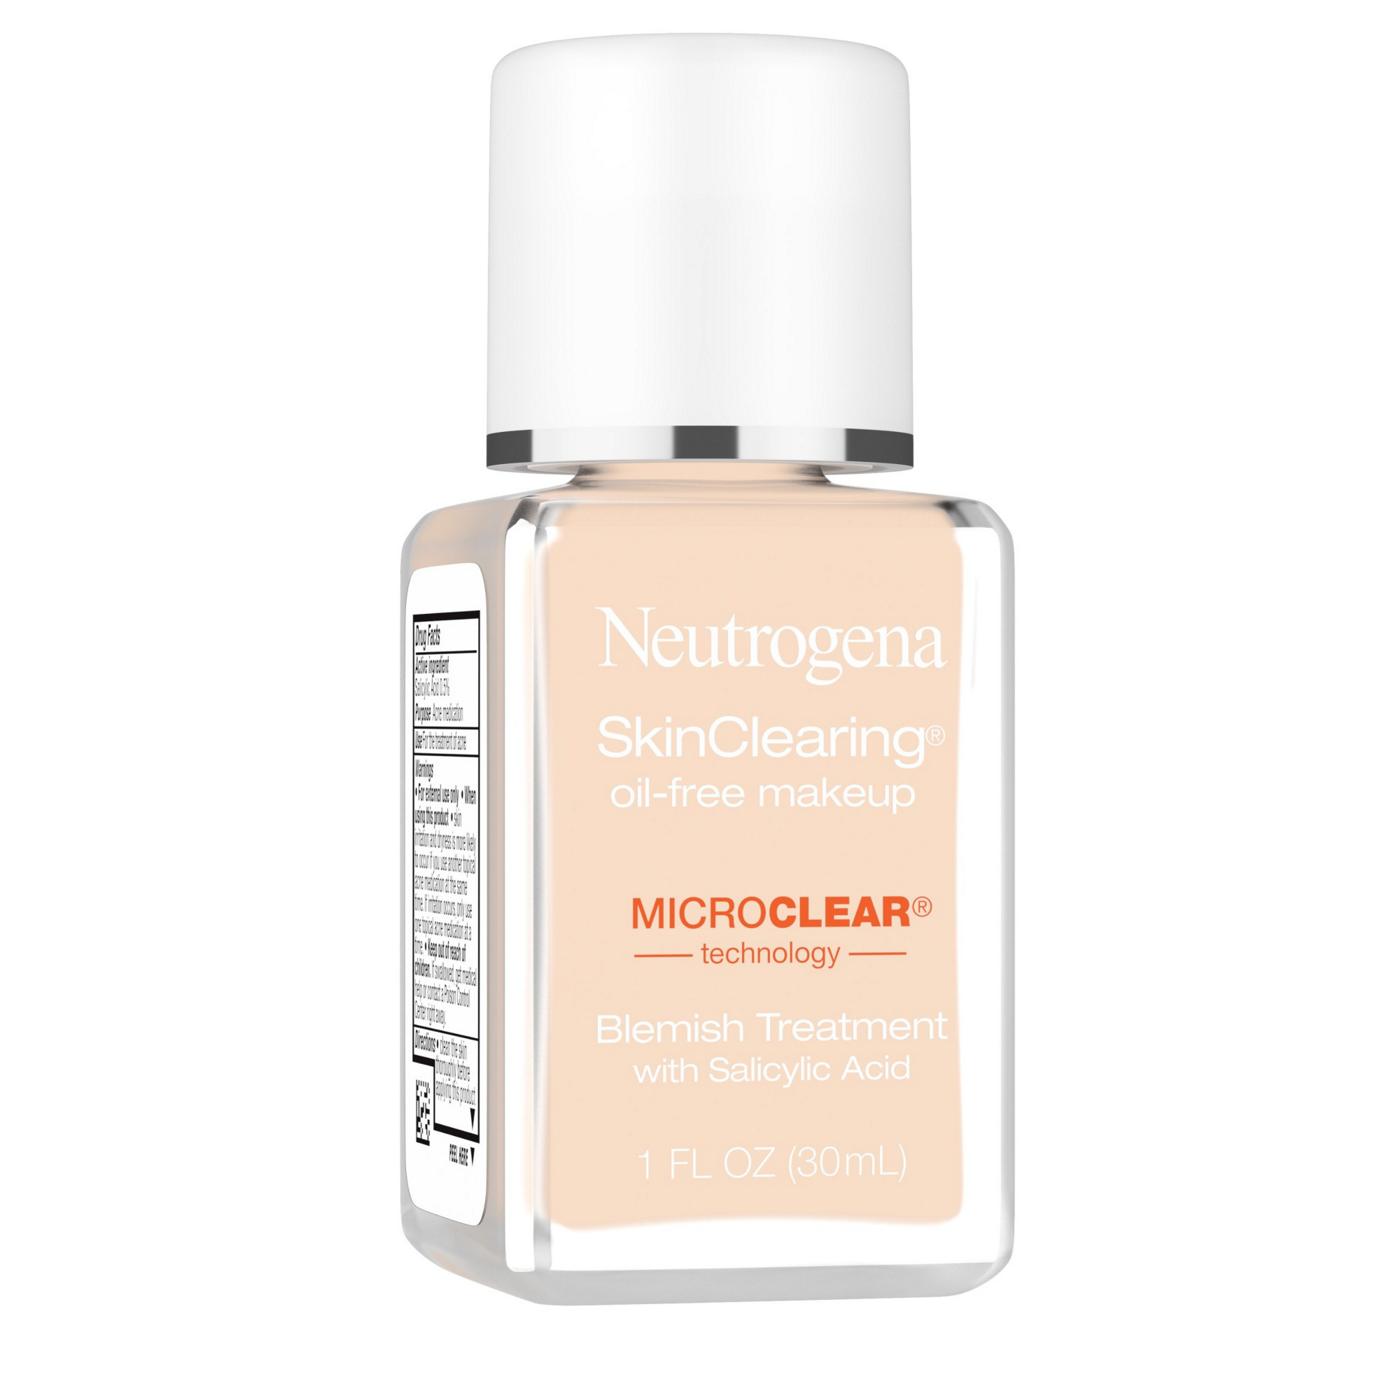 Neutrogena SkinClearing 10 Classic Ivory Oil-Free Makeup; image 2 of 8